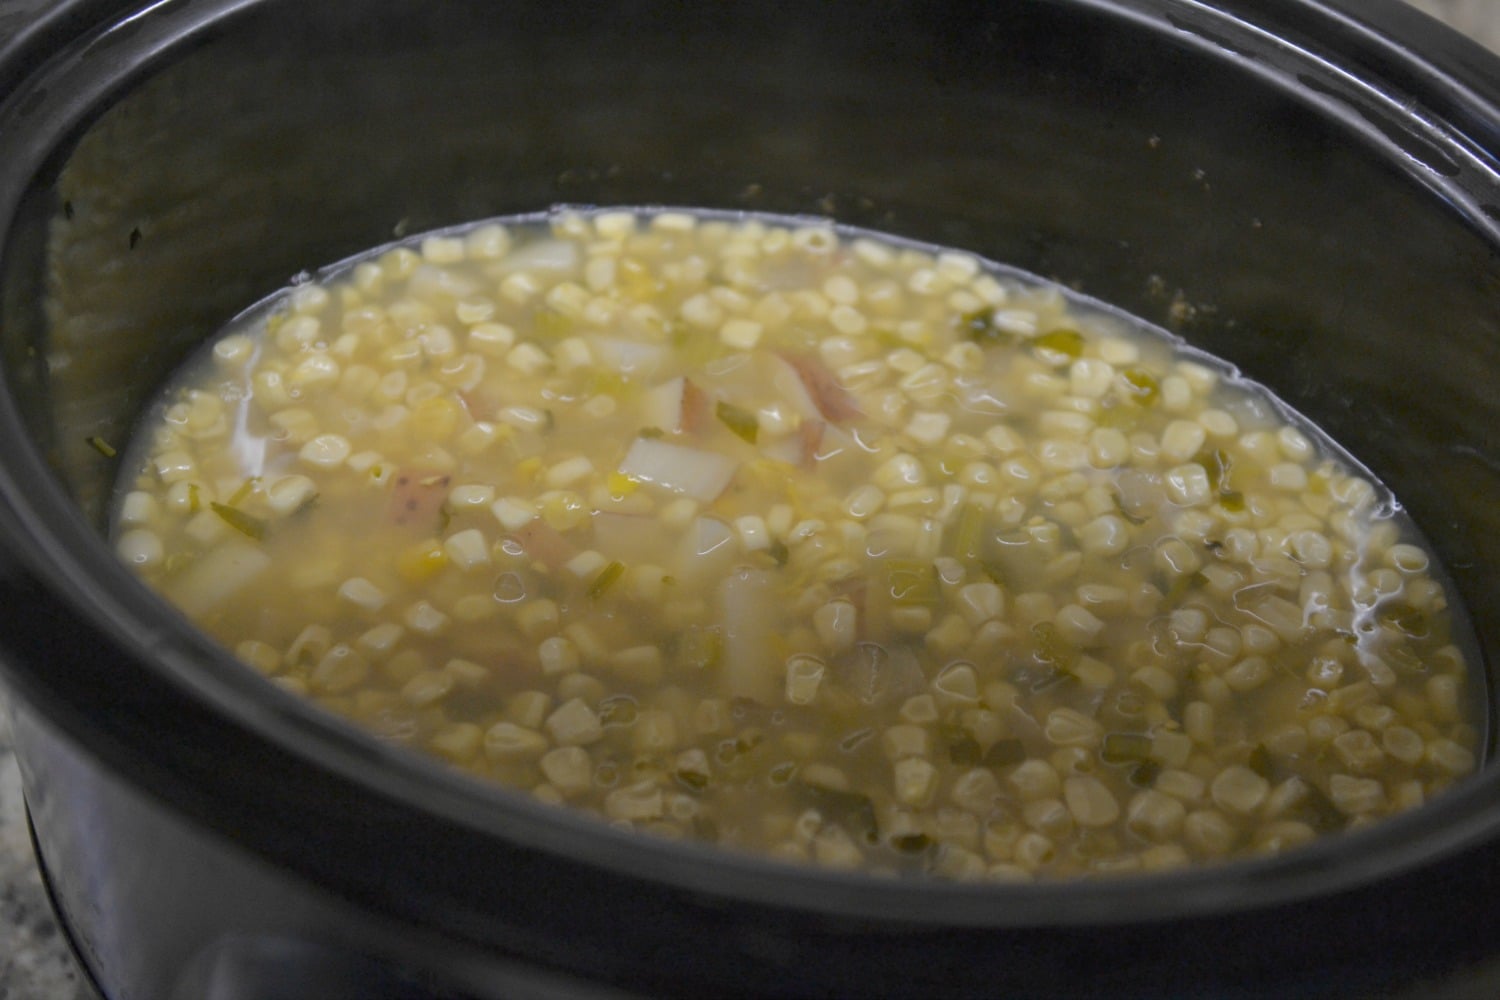 On cooking day, place frozen corn and clam chowder soup directly into slow cooker. 